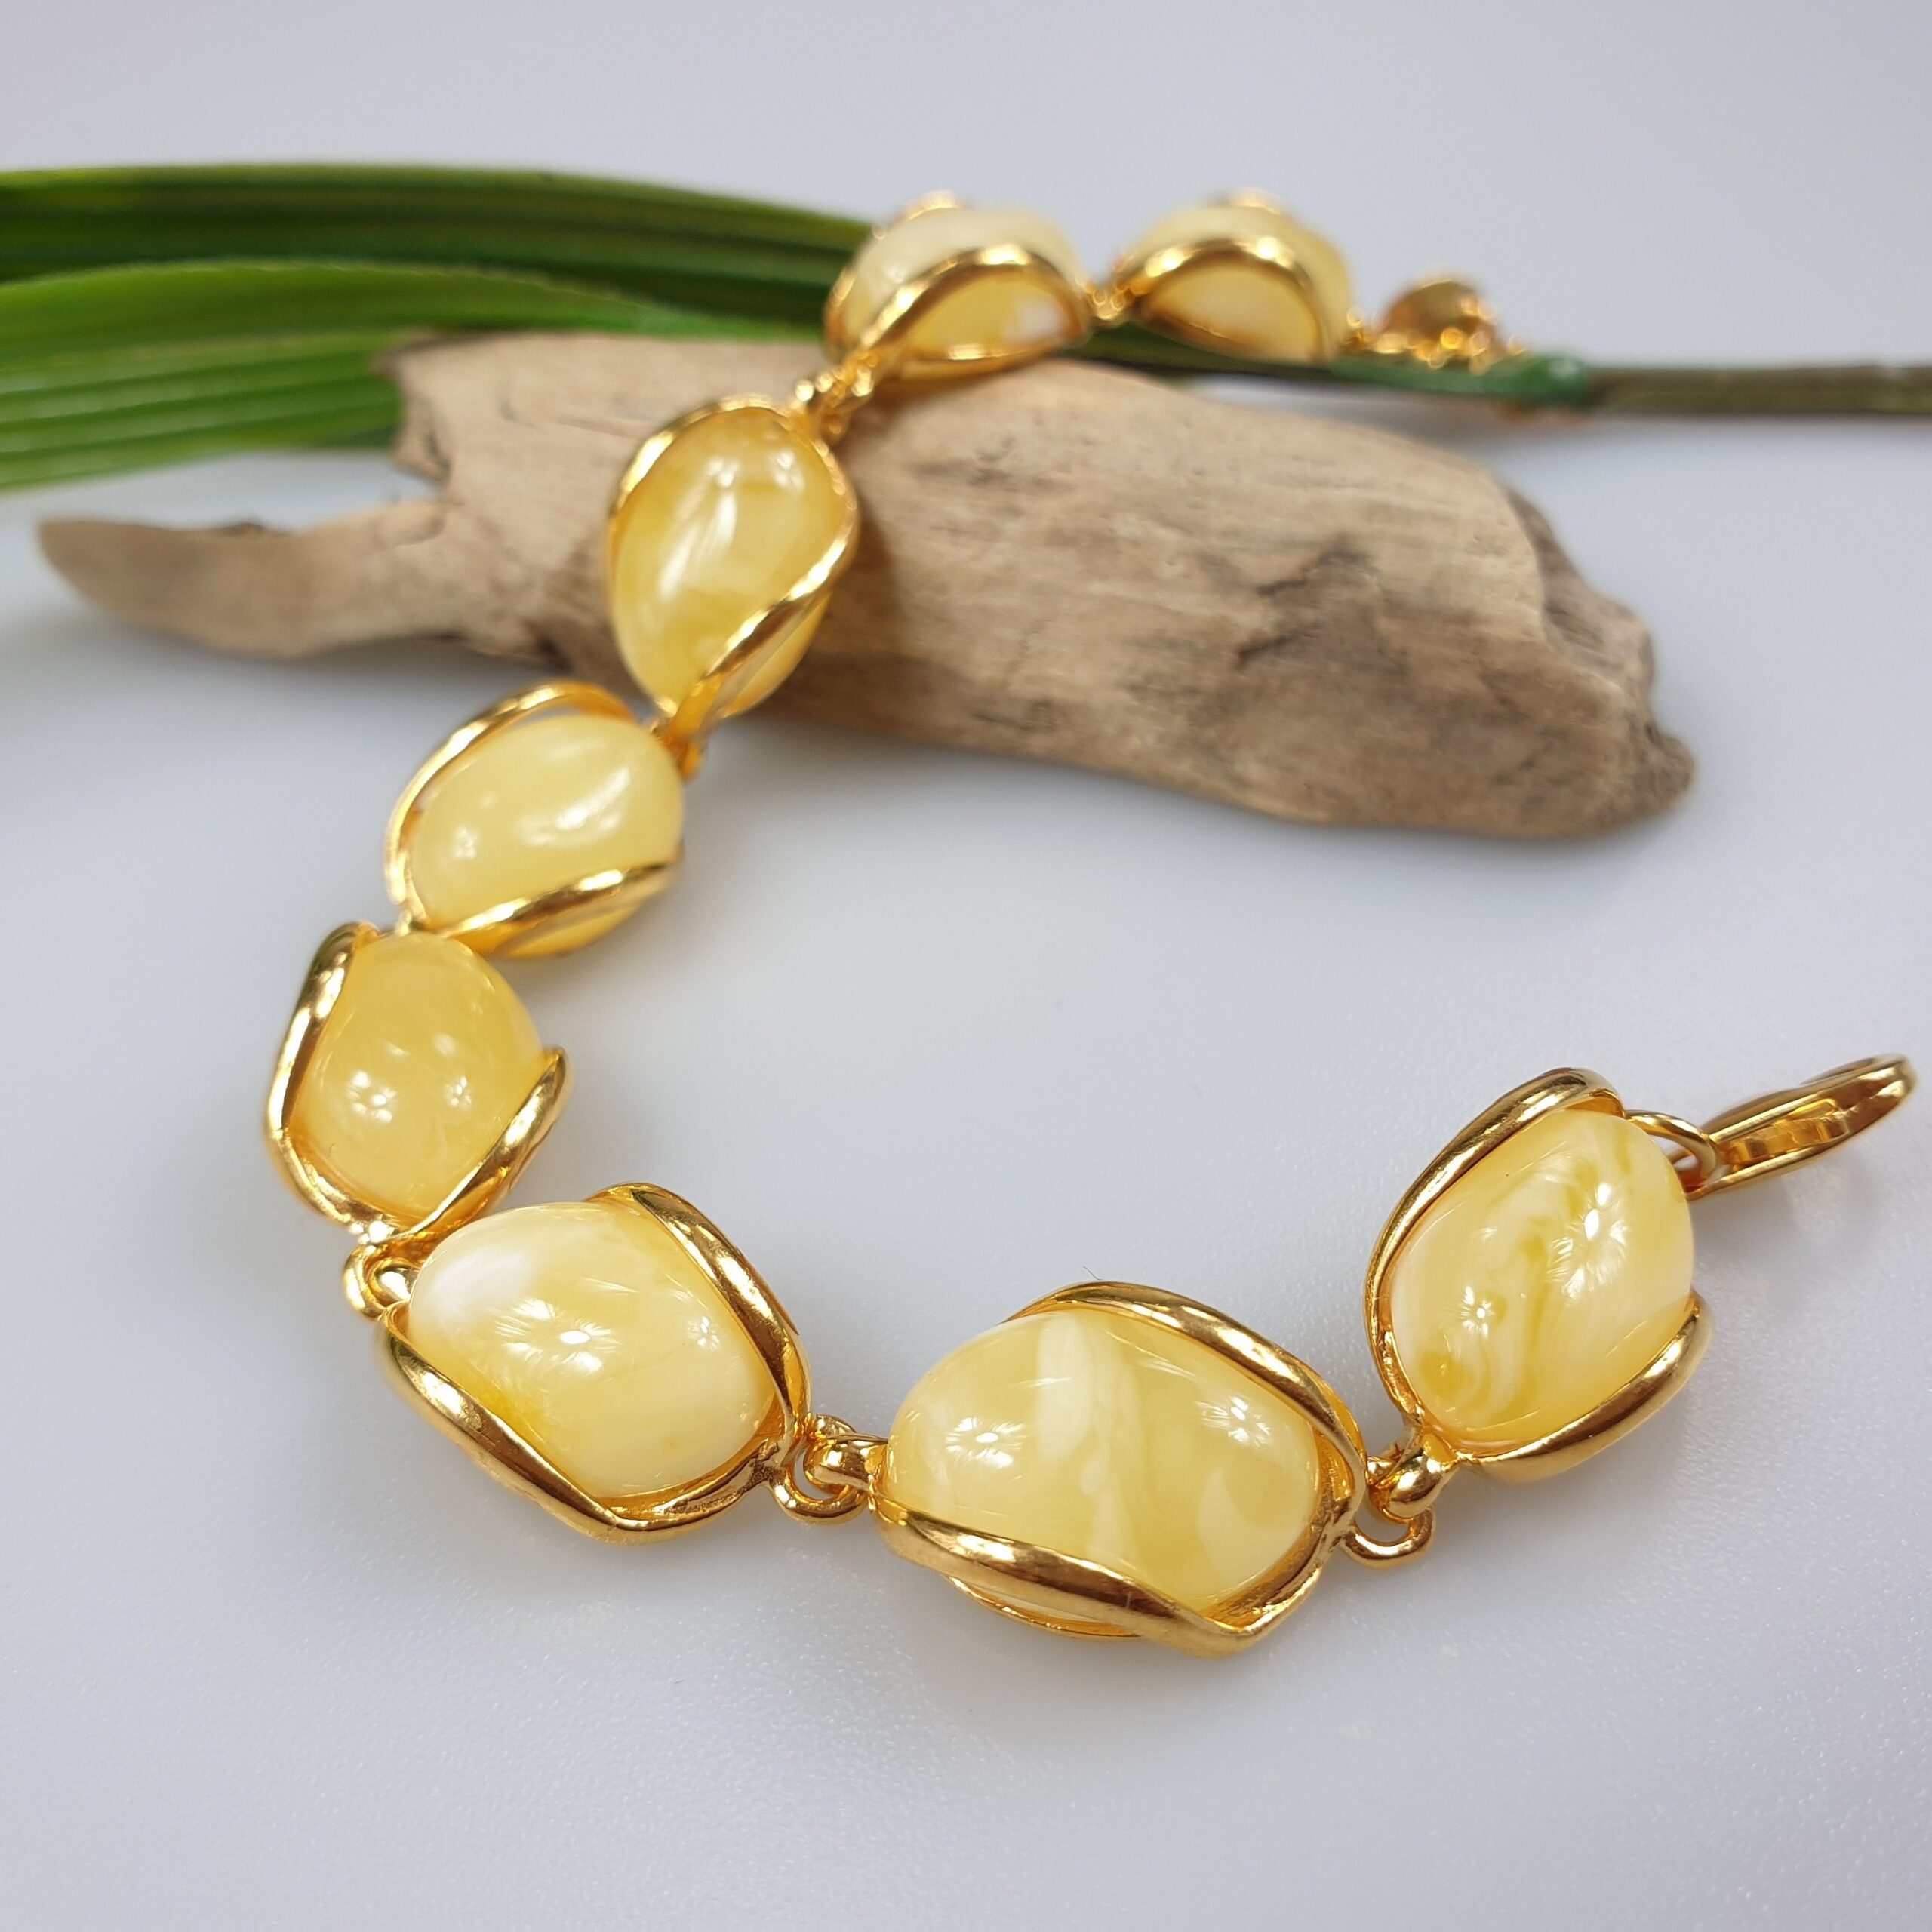 The healing properties of amber bracelet:
A guide to its benefits